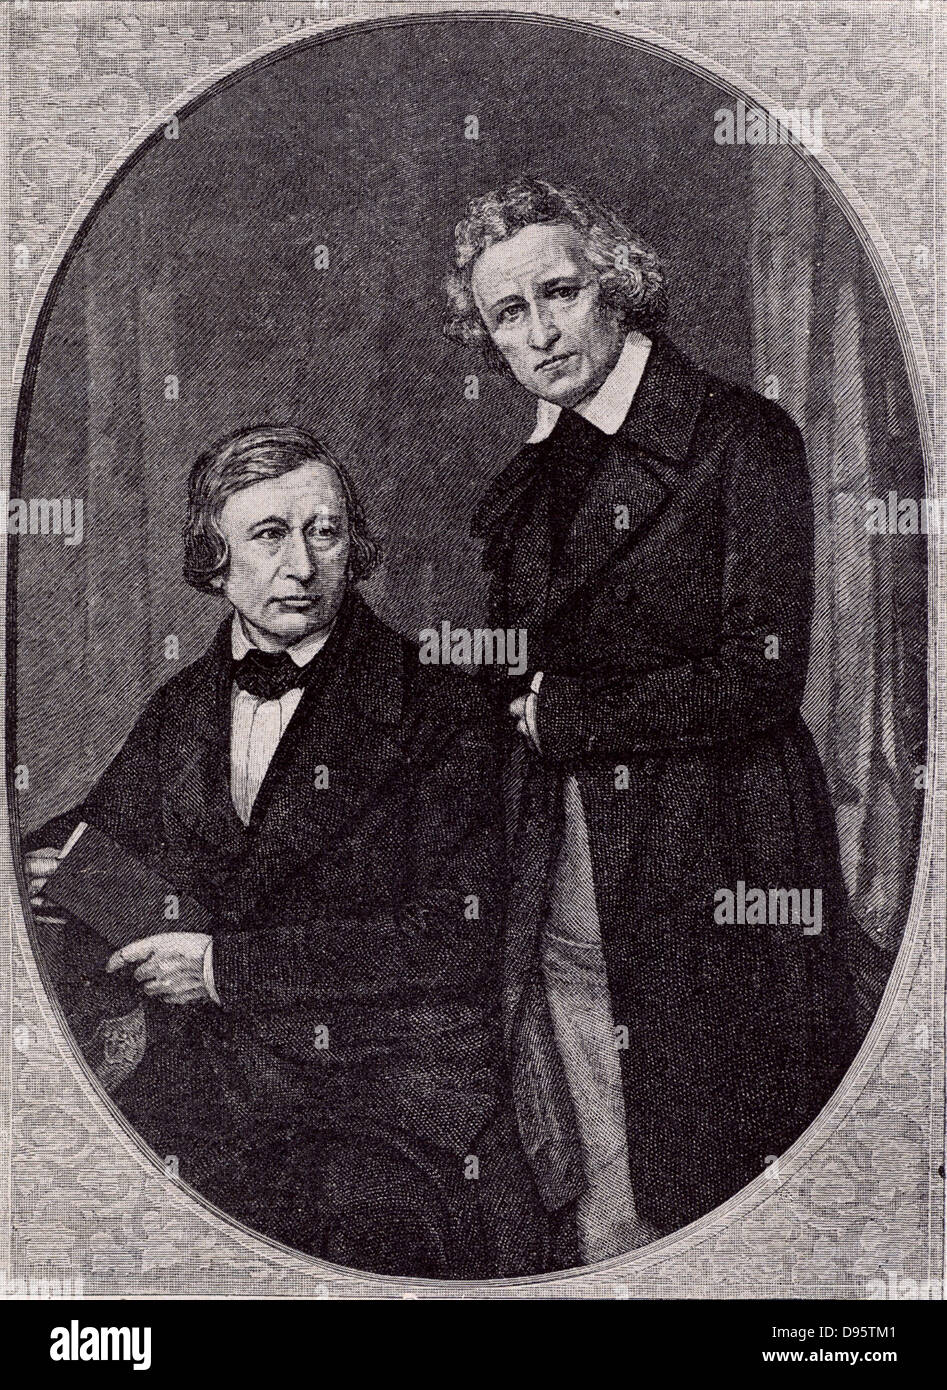 Wilhelm Carl Grimm (1786-1859) left, and Jacob Ludwig Carl Grimm (1786-1859) right, German philologists and folklorists.  The English speaking world knows them best for their fairy tales 'Kinder- und Hausmarchen' (1812-1815) published as 'German Popular Stories' (London, 1823) illustrated by George Cruikshank. Stock Photo